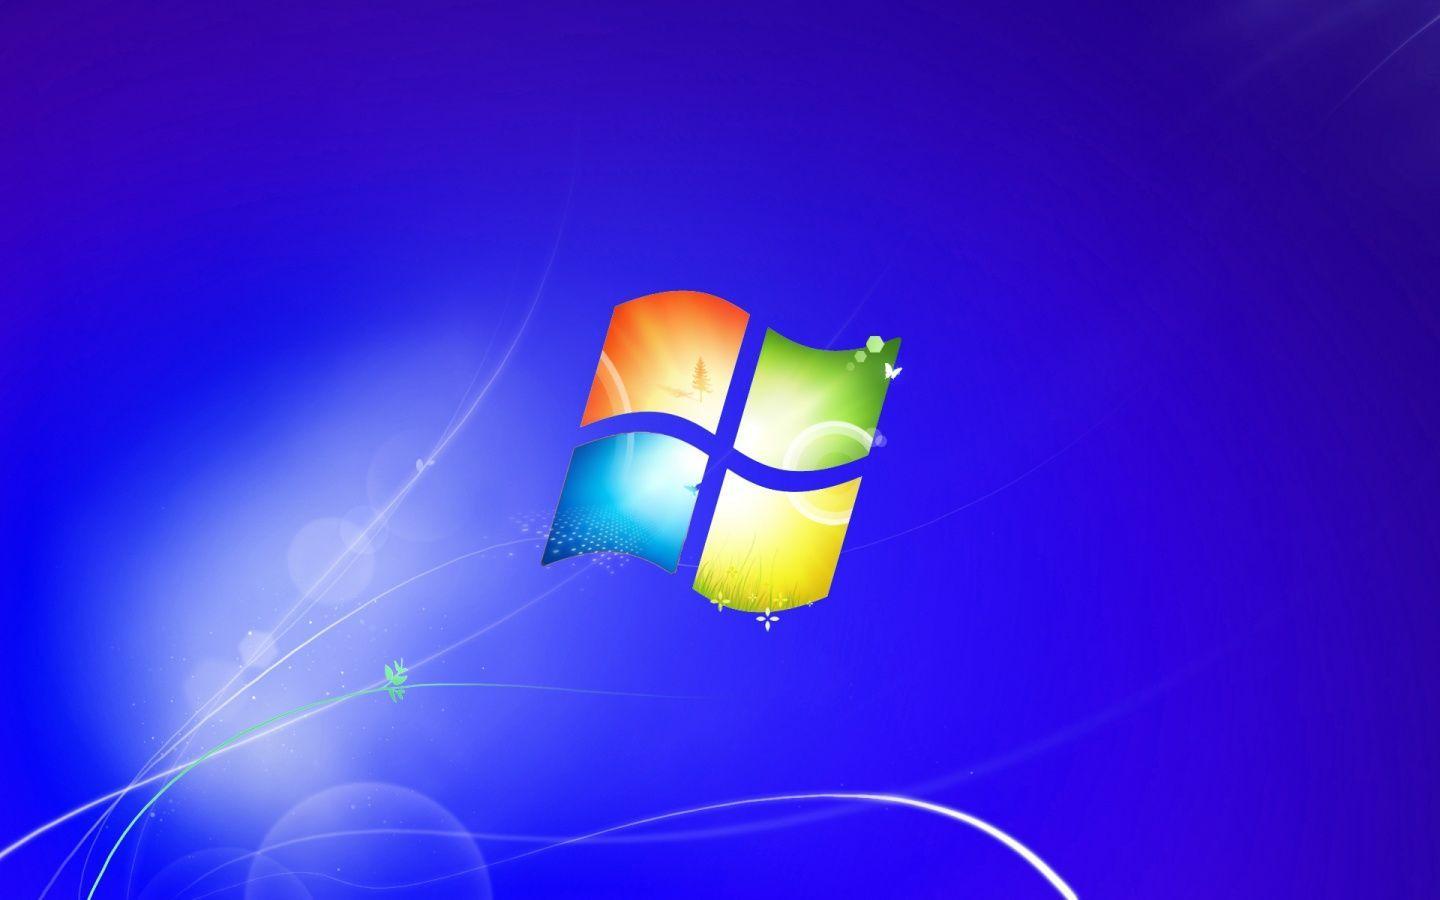 Windows 7 Blue Wallpaper and Background